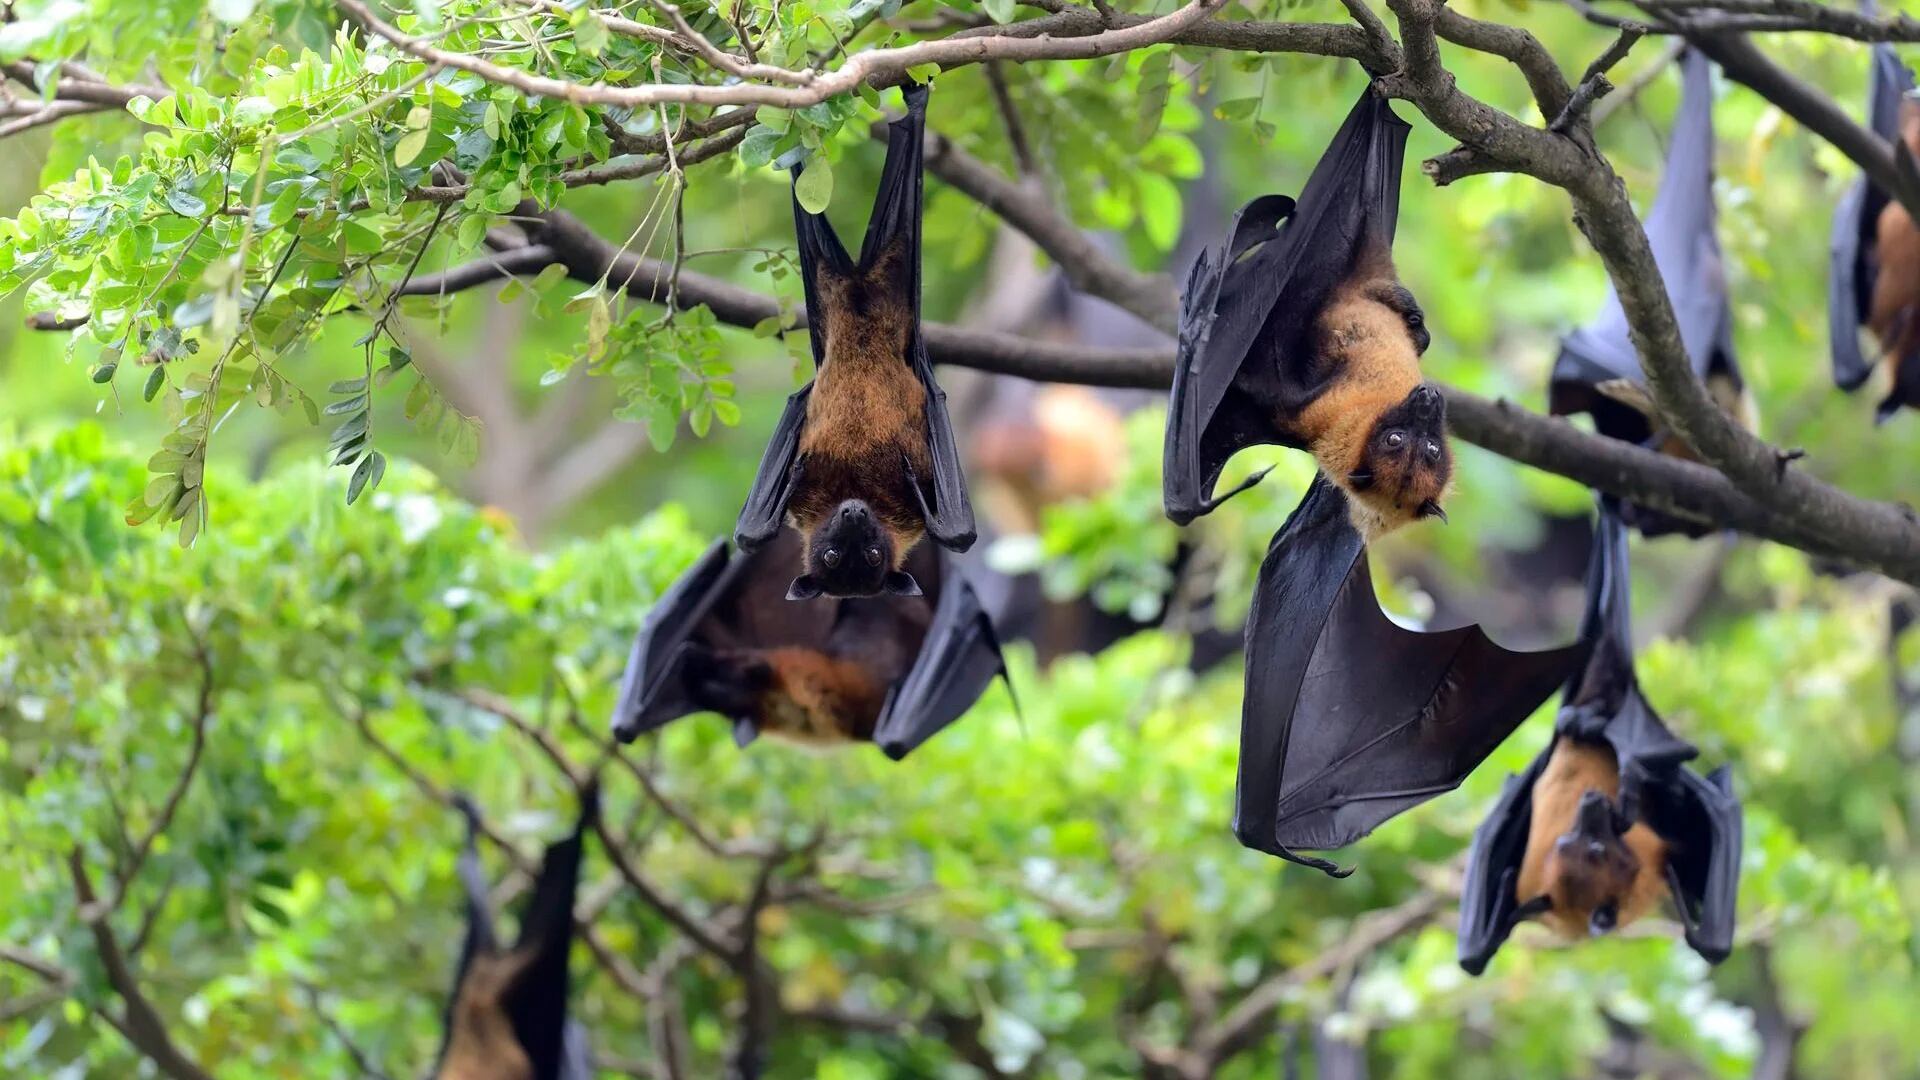 Nipah virus infection is a zoonotic disease, meaning it is spread between animals and people. Fruit bats are the natural host of the virus.The first known Nipah outbreak occurred in Asia in 1998/WHO